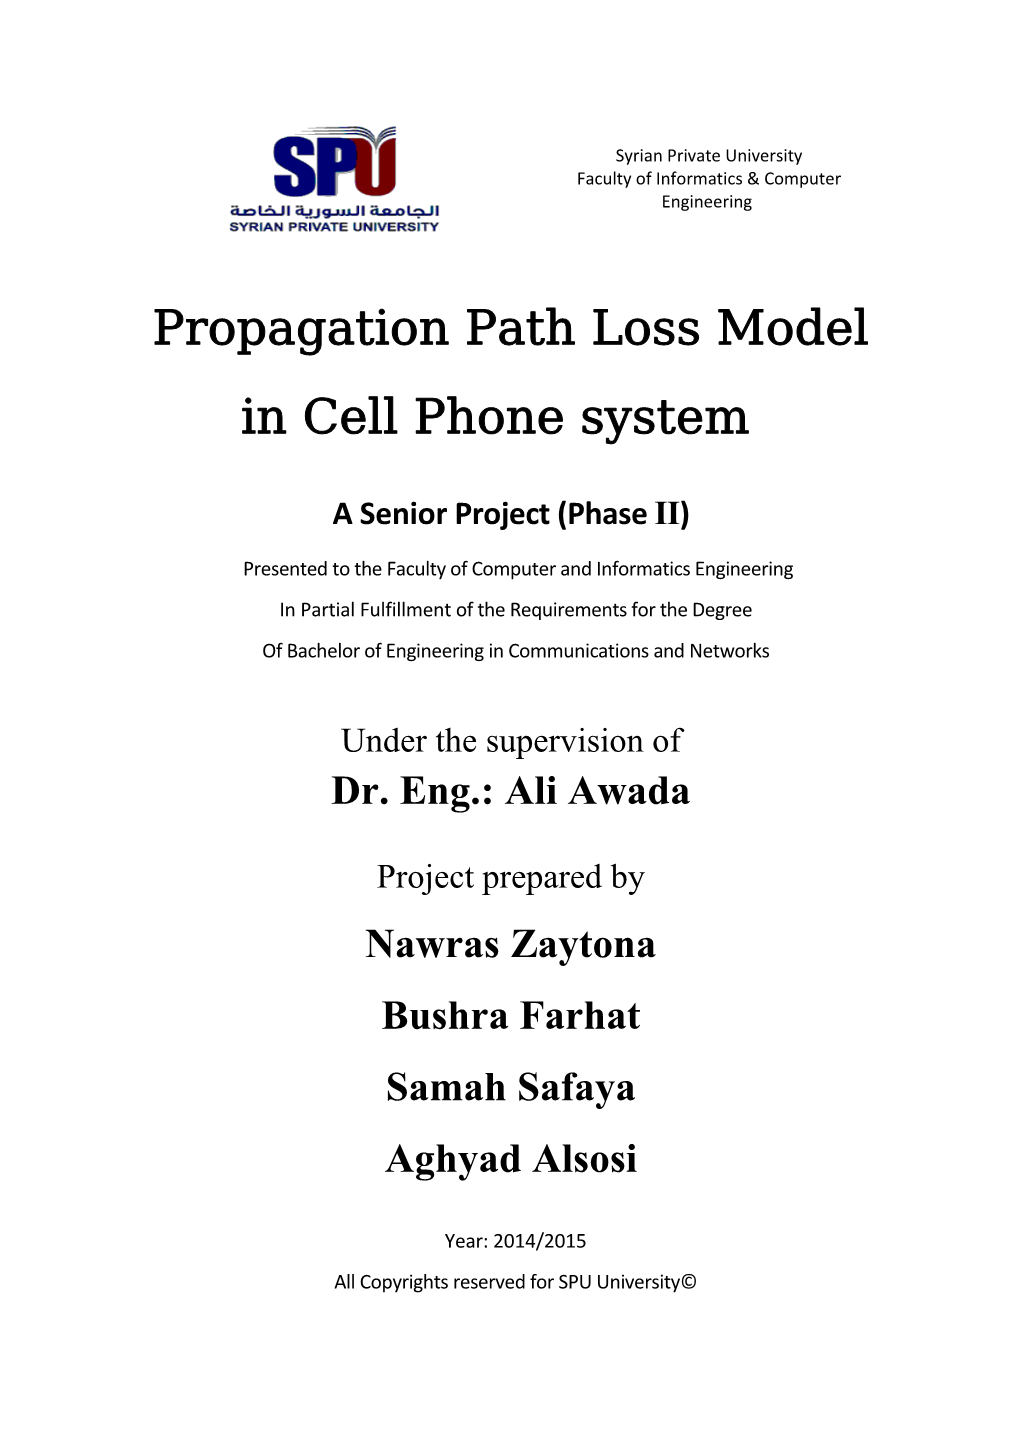 Propagation Path Loss Model in Cell Phone System